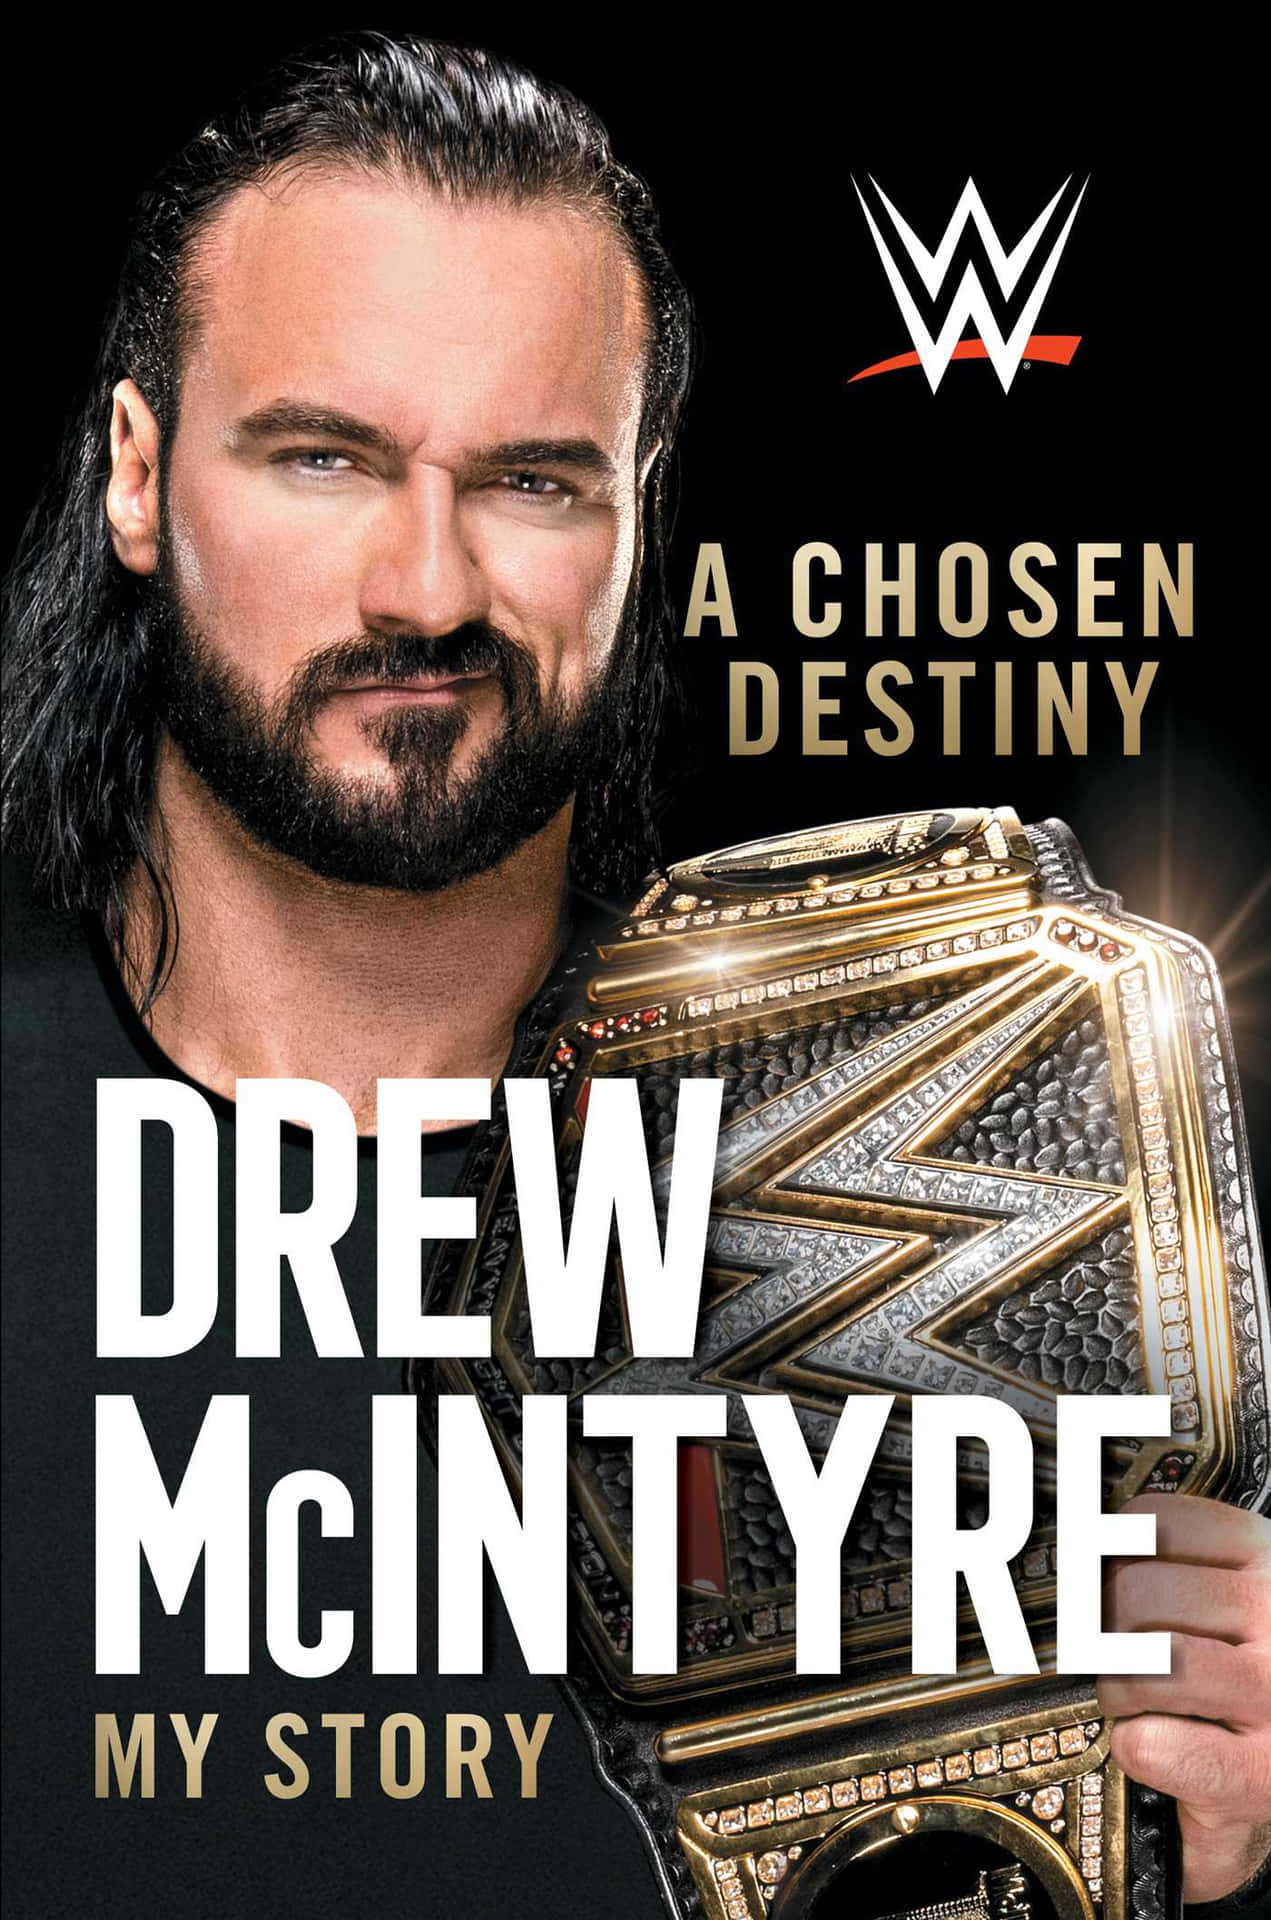 "Dominant WWE Superstar, Drew McIntyre Standing Victorious in The Ring" Wallpaper